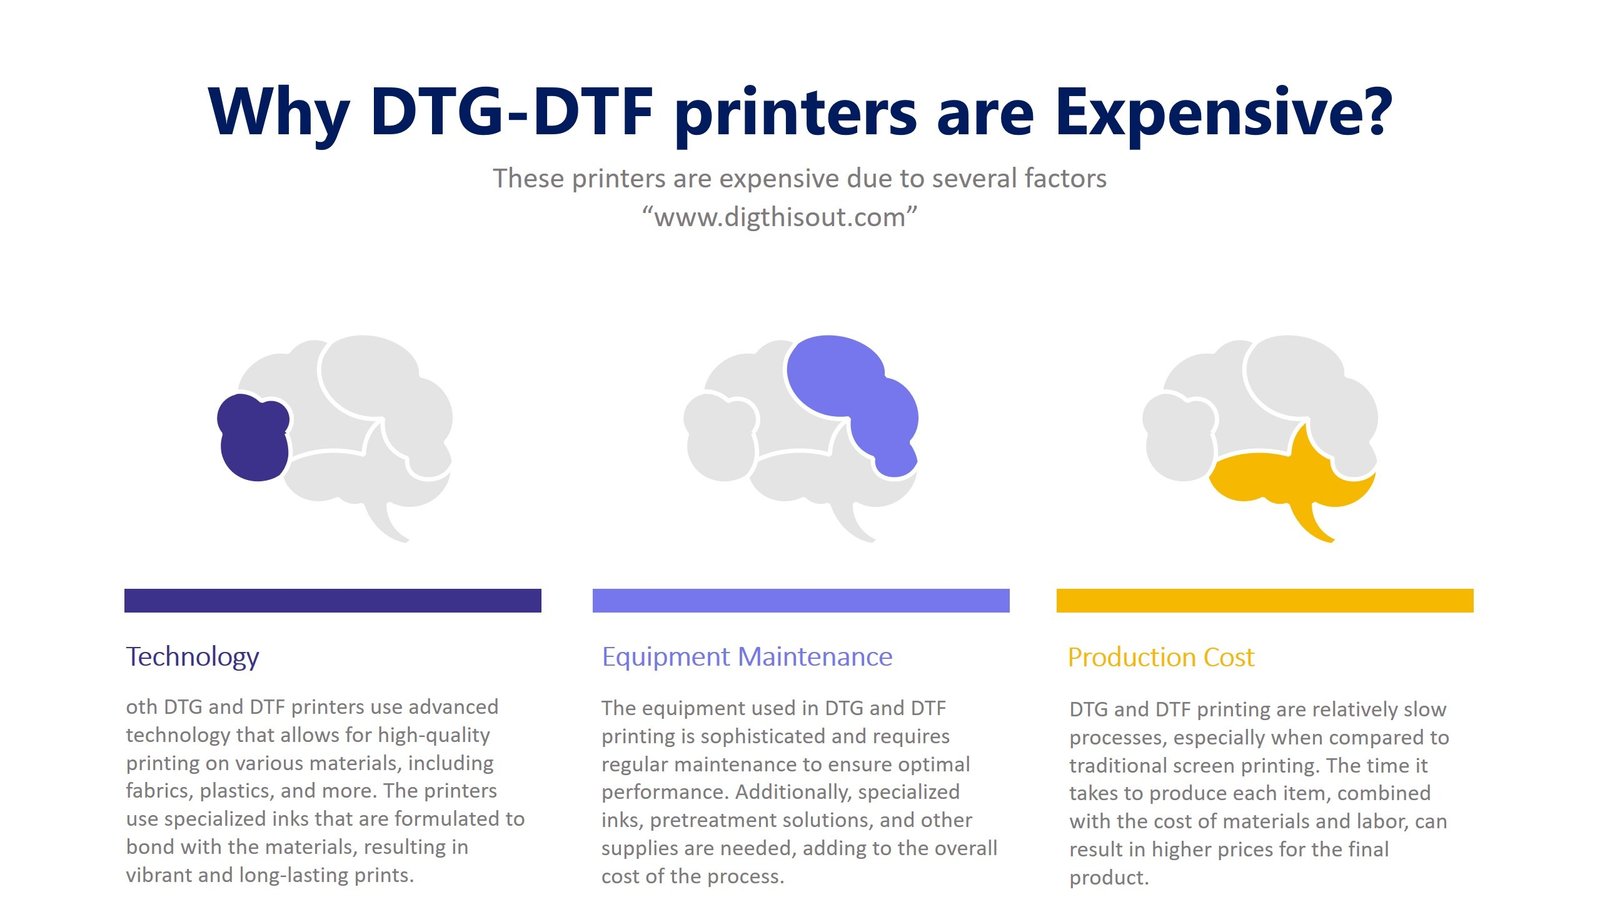 Why are DTG - DTF printers so expensive